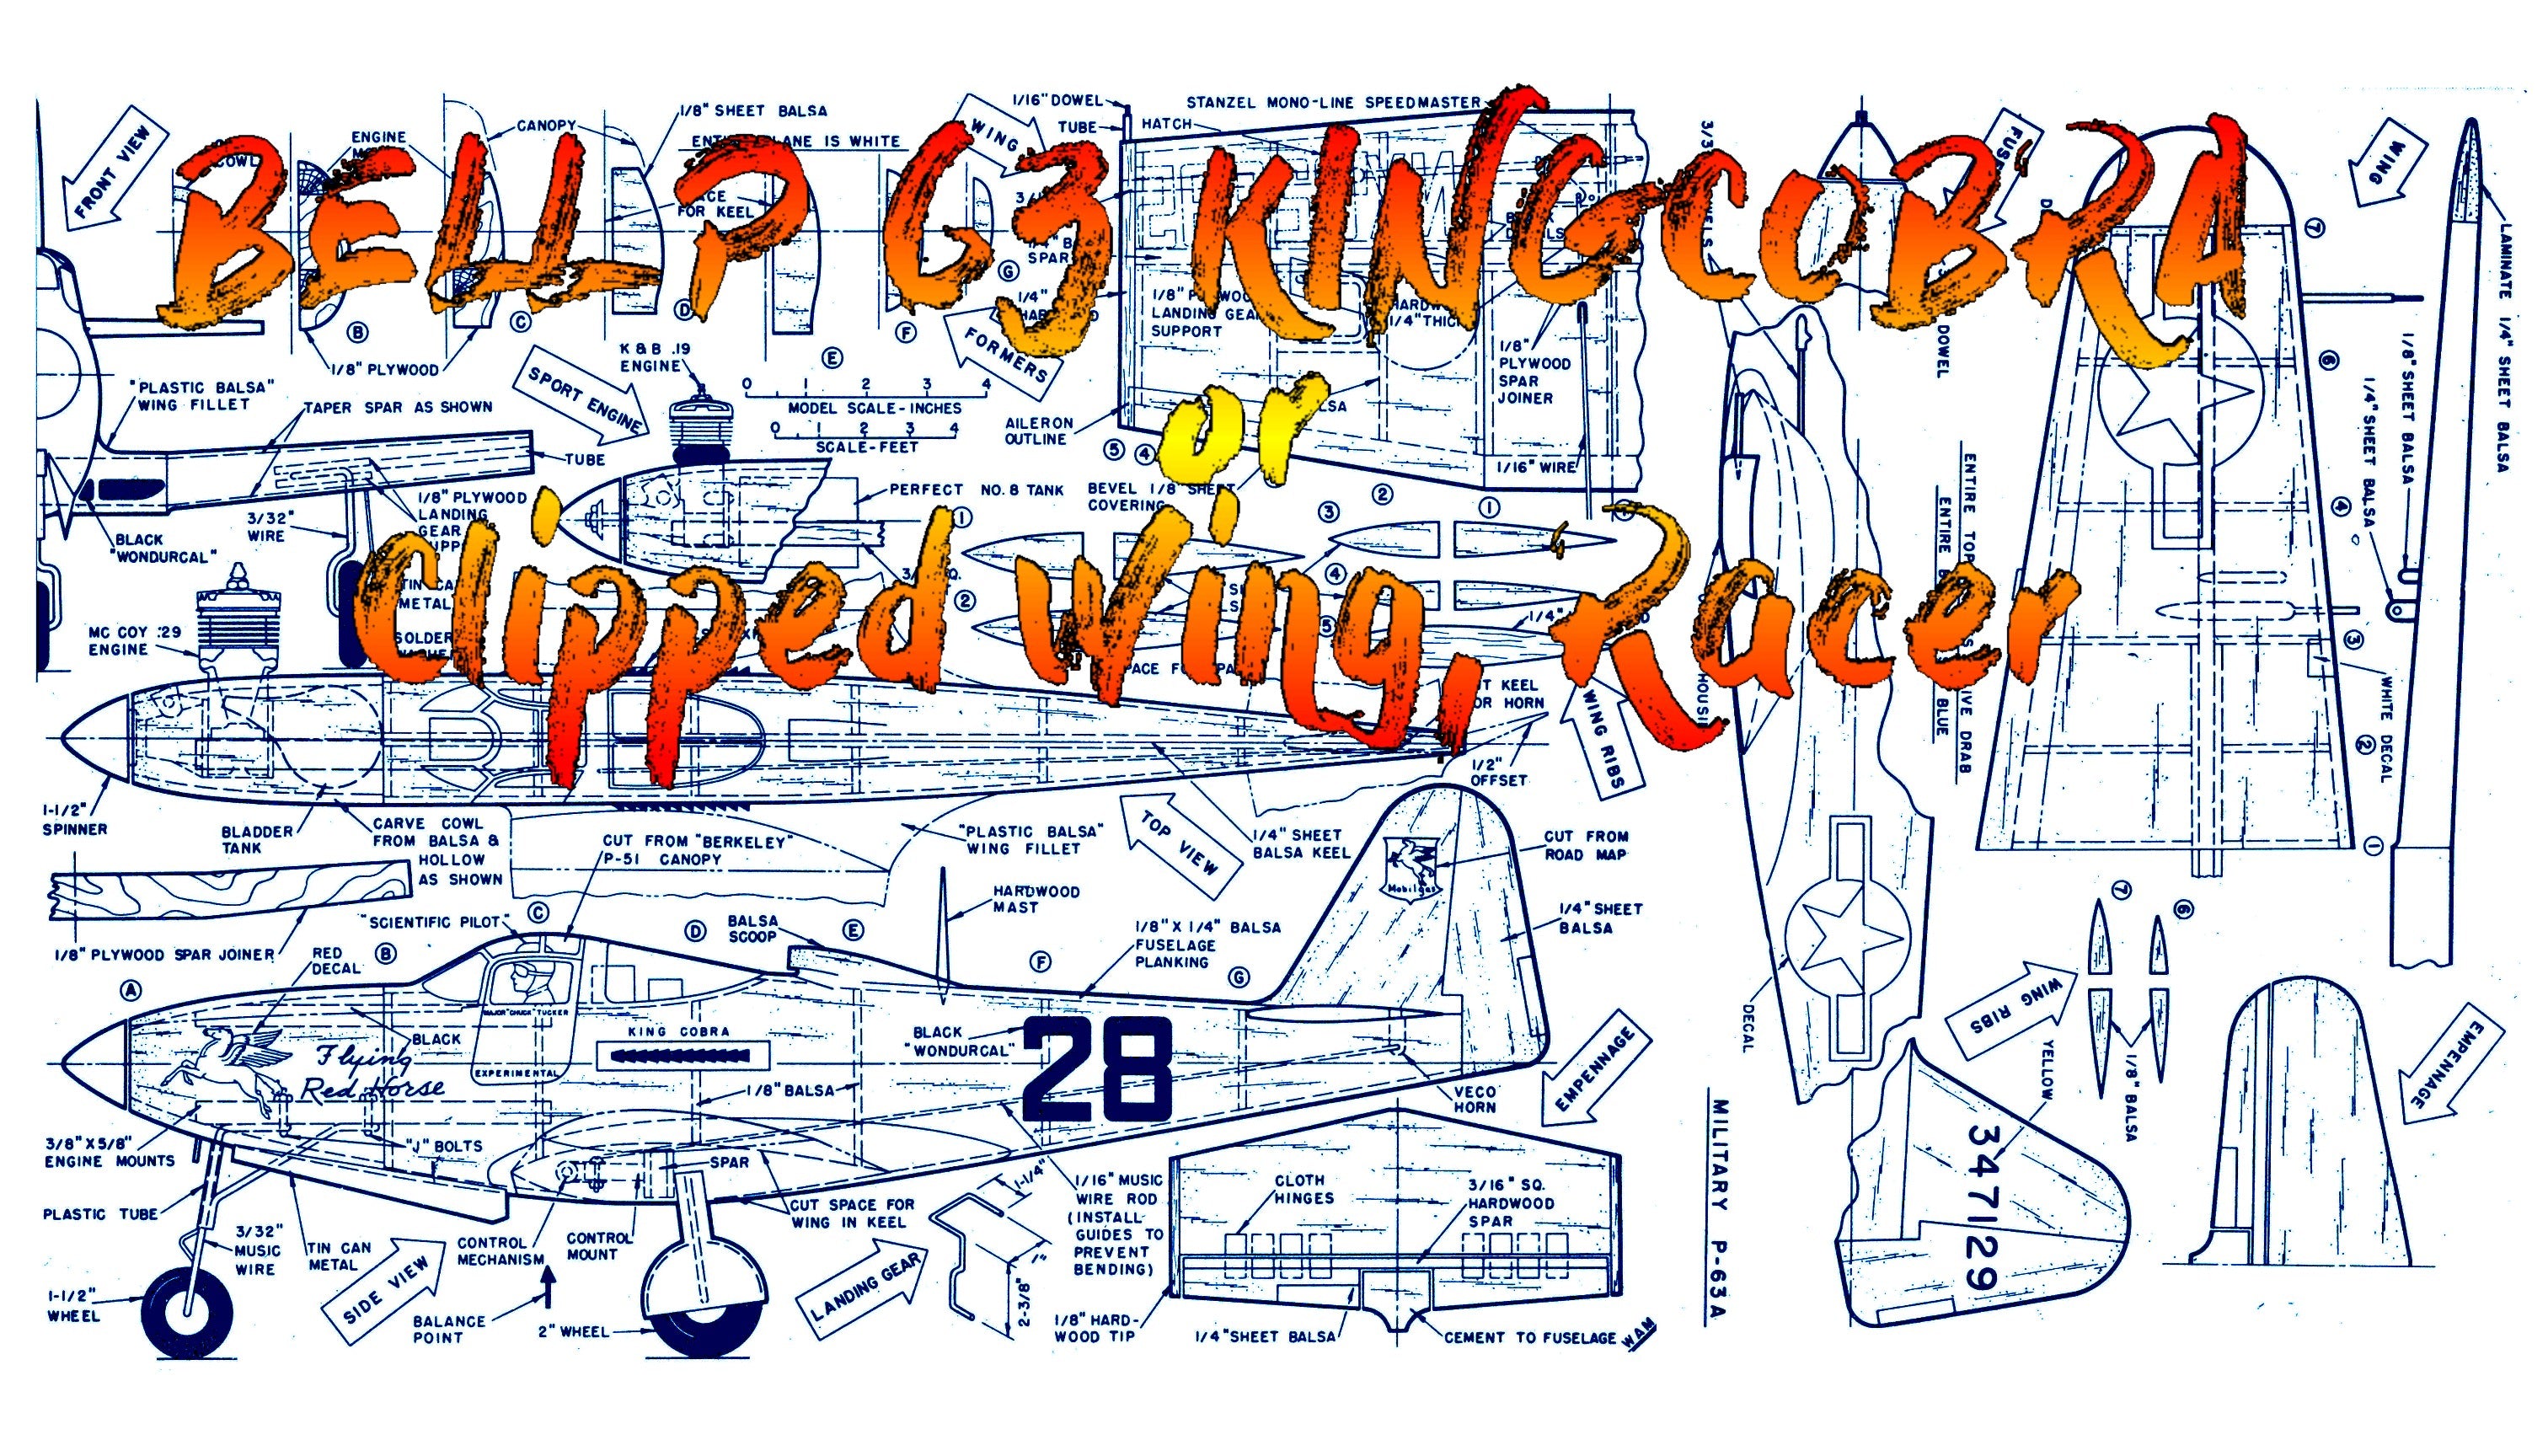 full size printed plans scale 1:16 control line bell p‑63 kingcobra  or  clipped wing, racer.